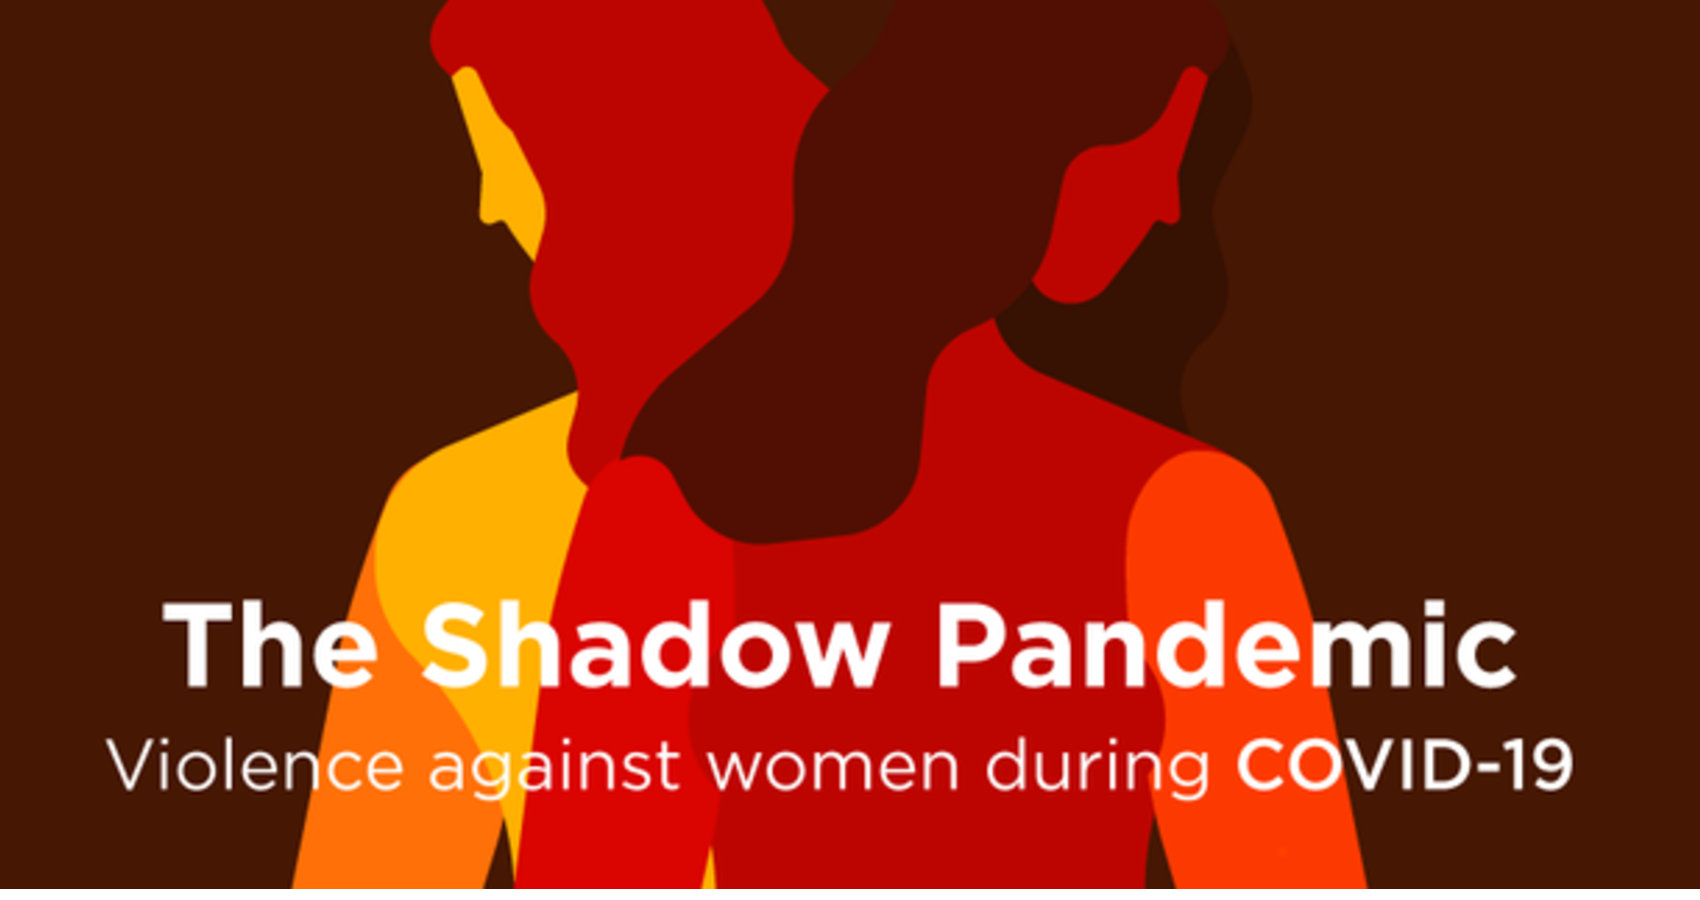 A picture showing the shadow pandemic when it comes to violence against women